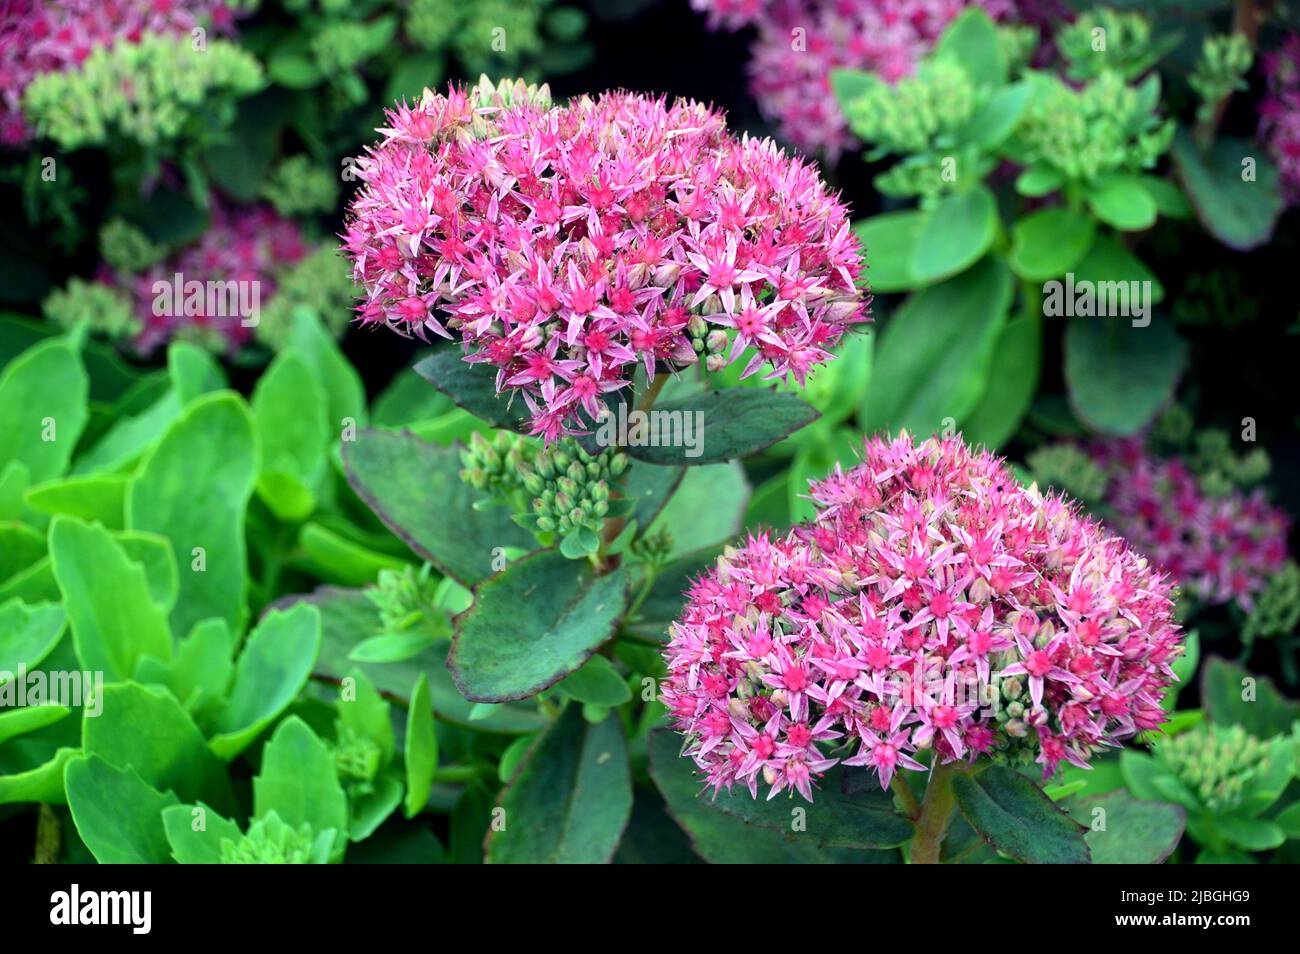 Two Clumps of Pink Sedum (Hylotelephium spectabile) 'Carl' Flowers grown in a Border at RHS Garden Harlow Carr, Harrogate, Yorkshire, England, UK. Stock Photo